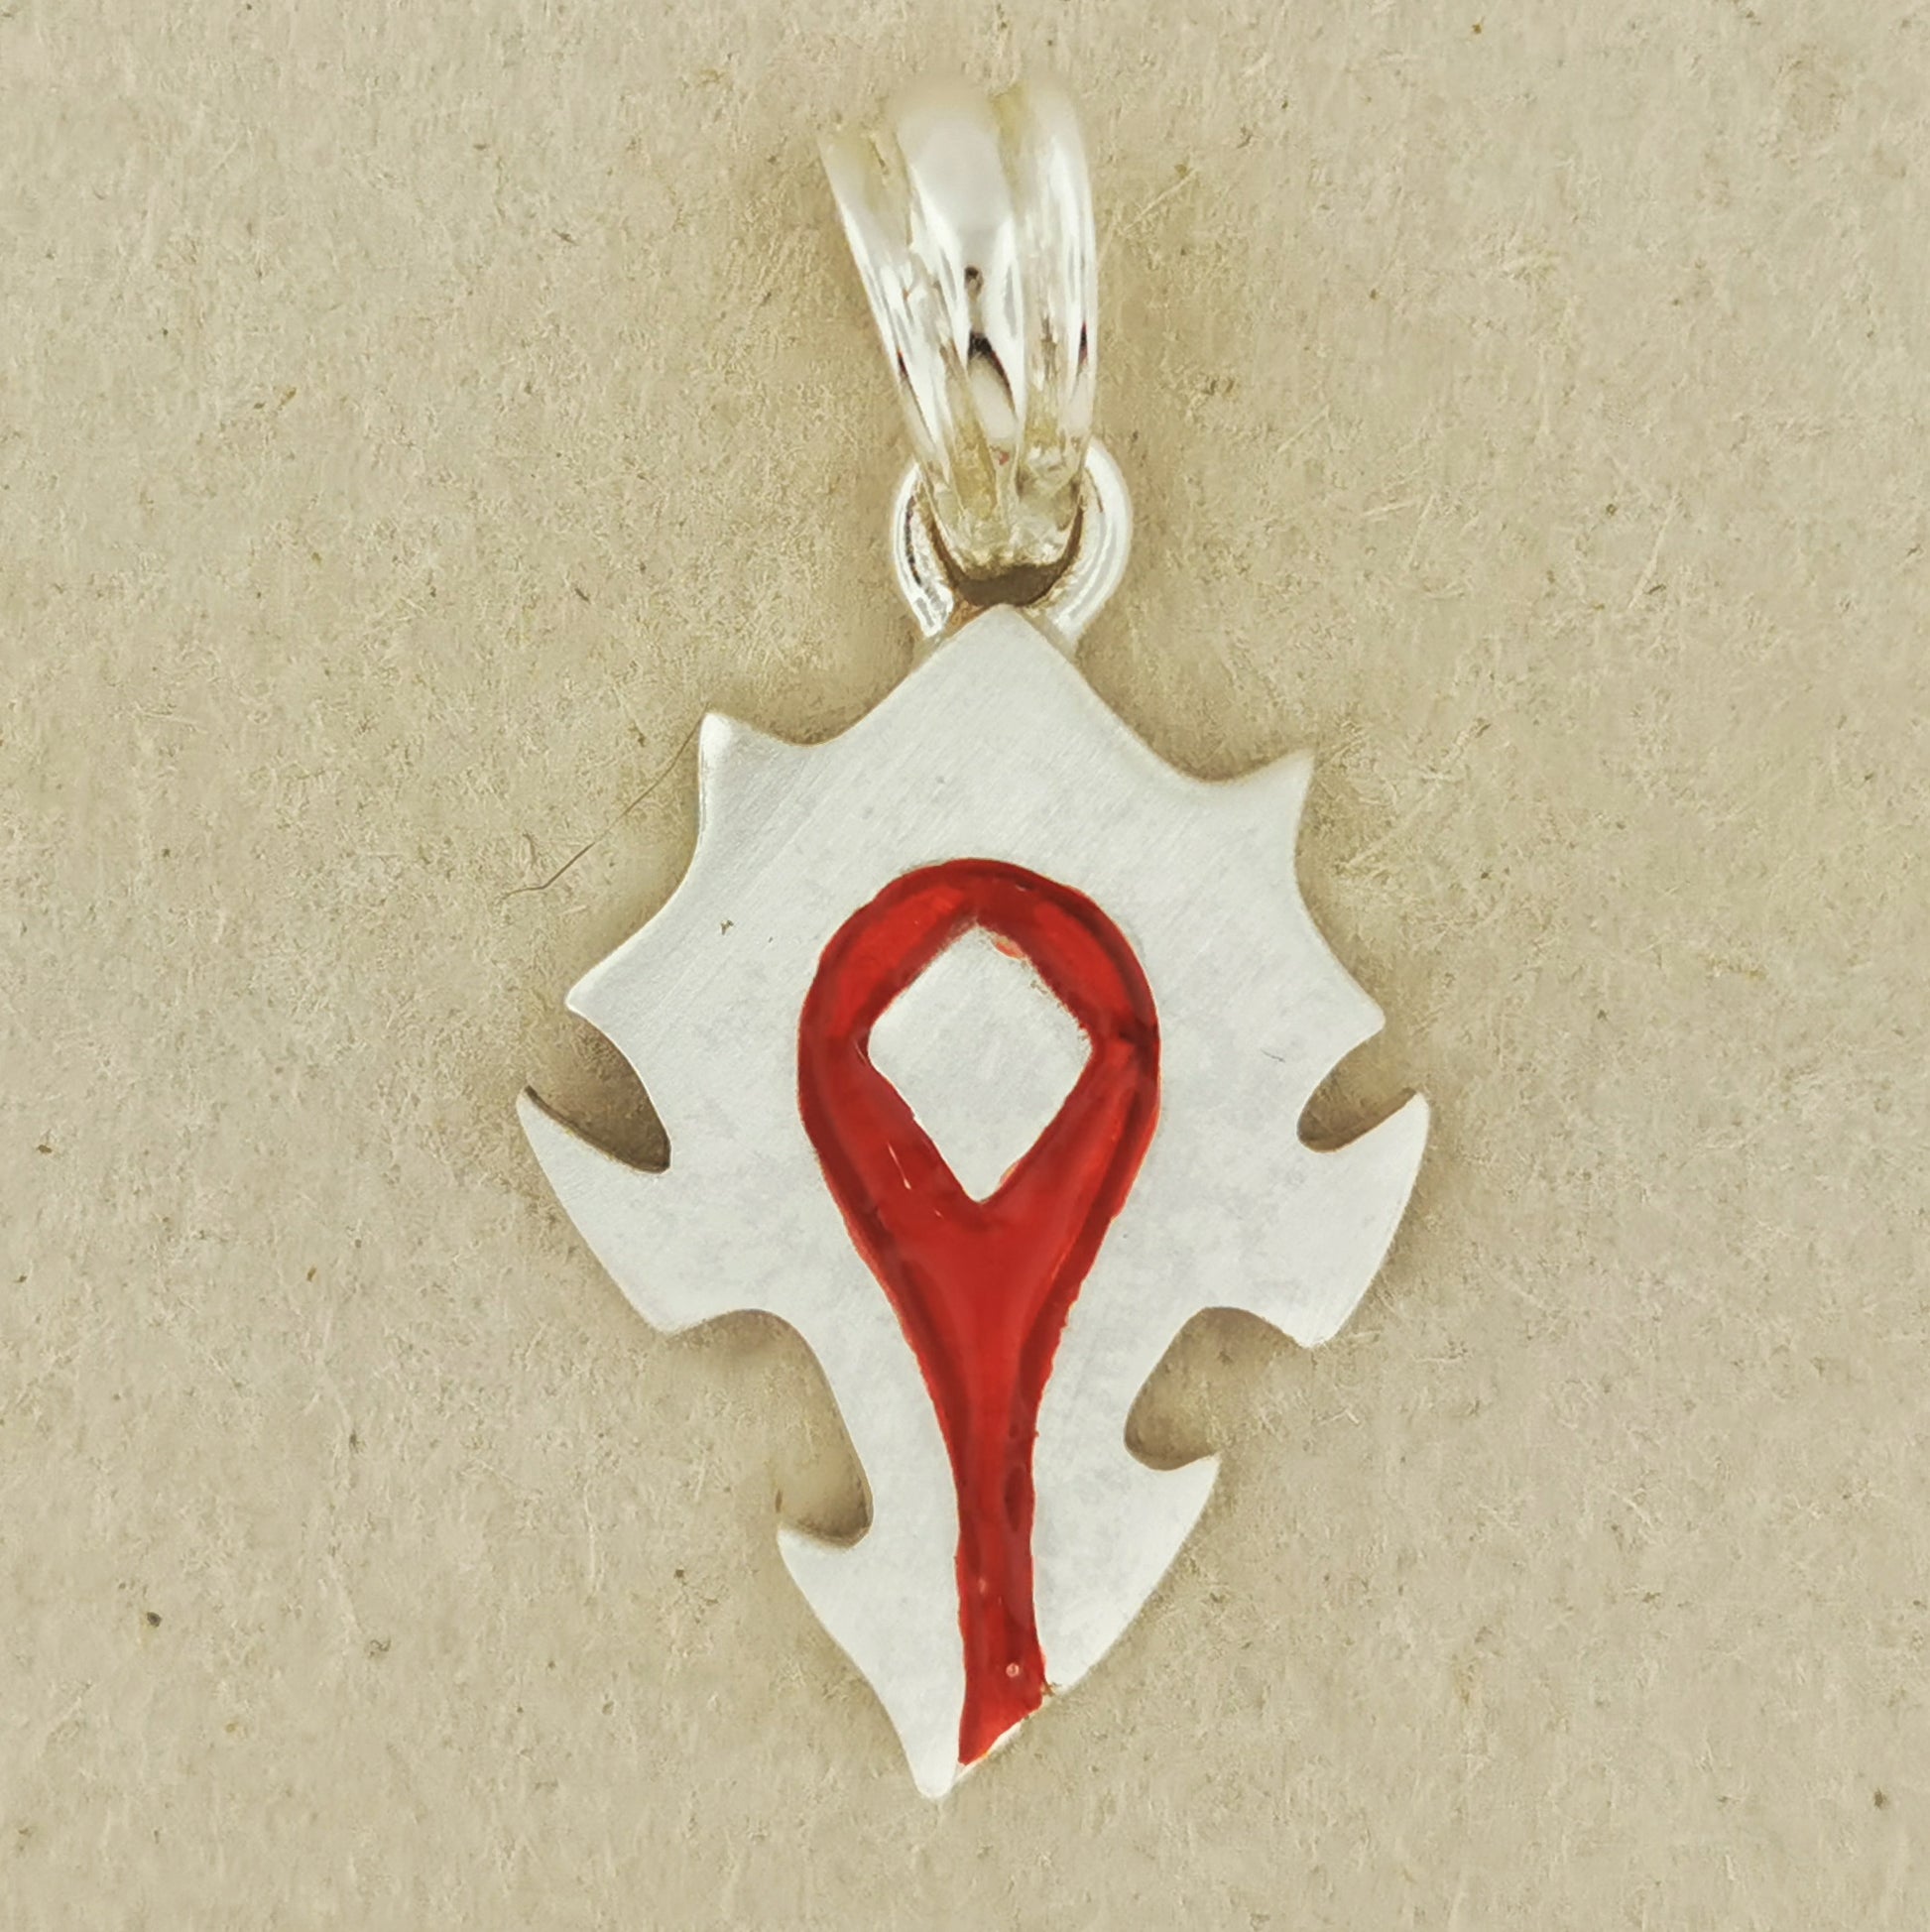 Horde pendant in Sterling Silver, World Of Warcraft Pendant, WoW Pendant, Video Game Pendant, gamer geek jewelry, world of warcraft jewelry, world of warcraft cosplay, silver warcraft jewelry, video game jewelry, gamer pendant, cosplay pendant